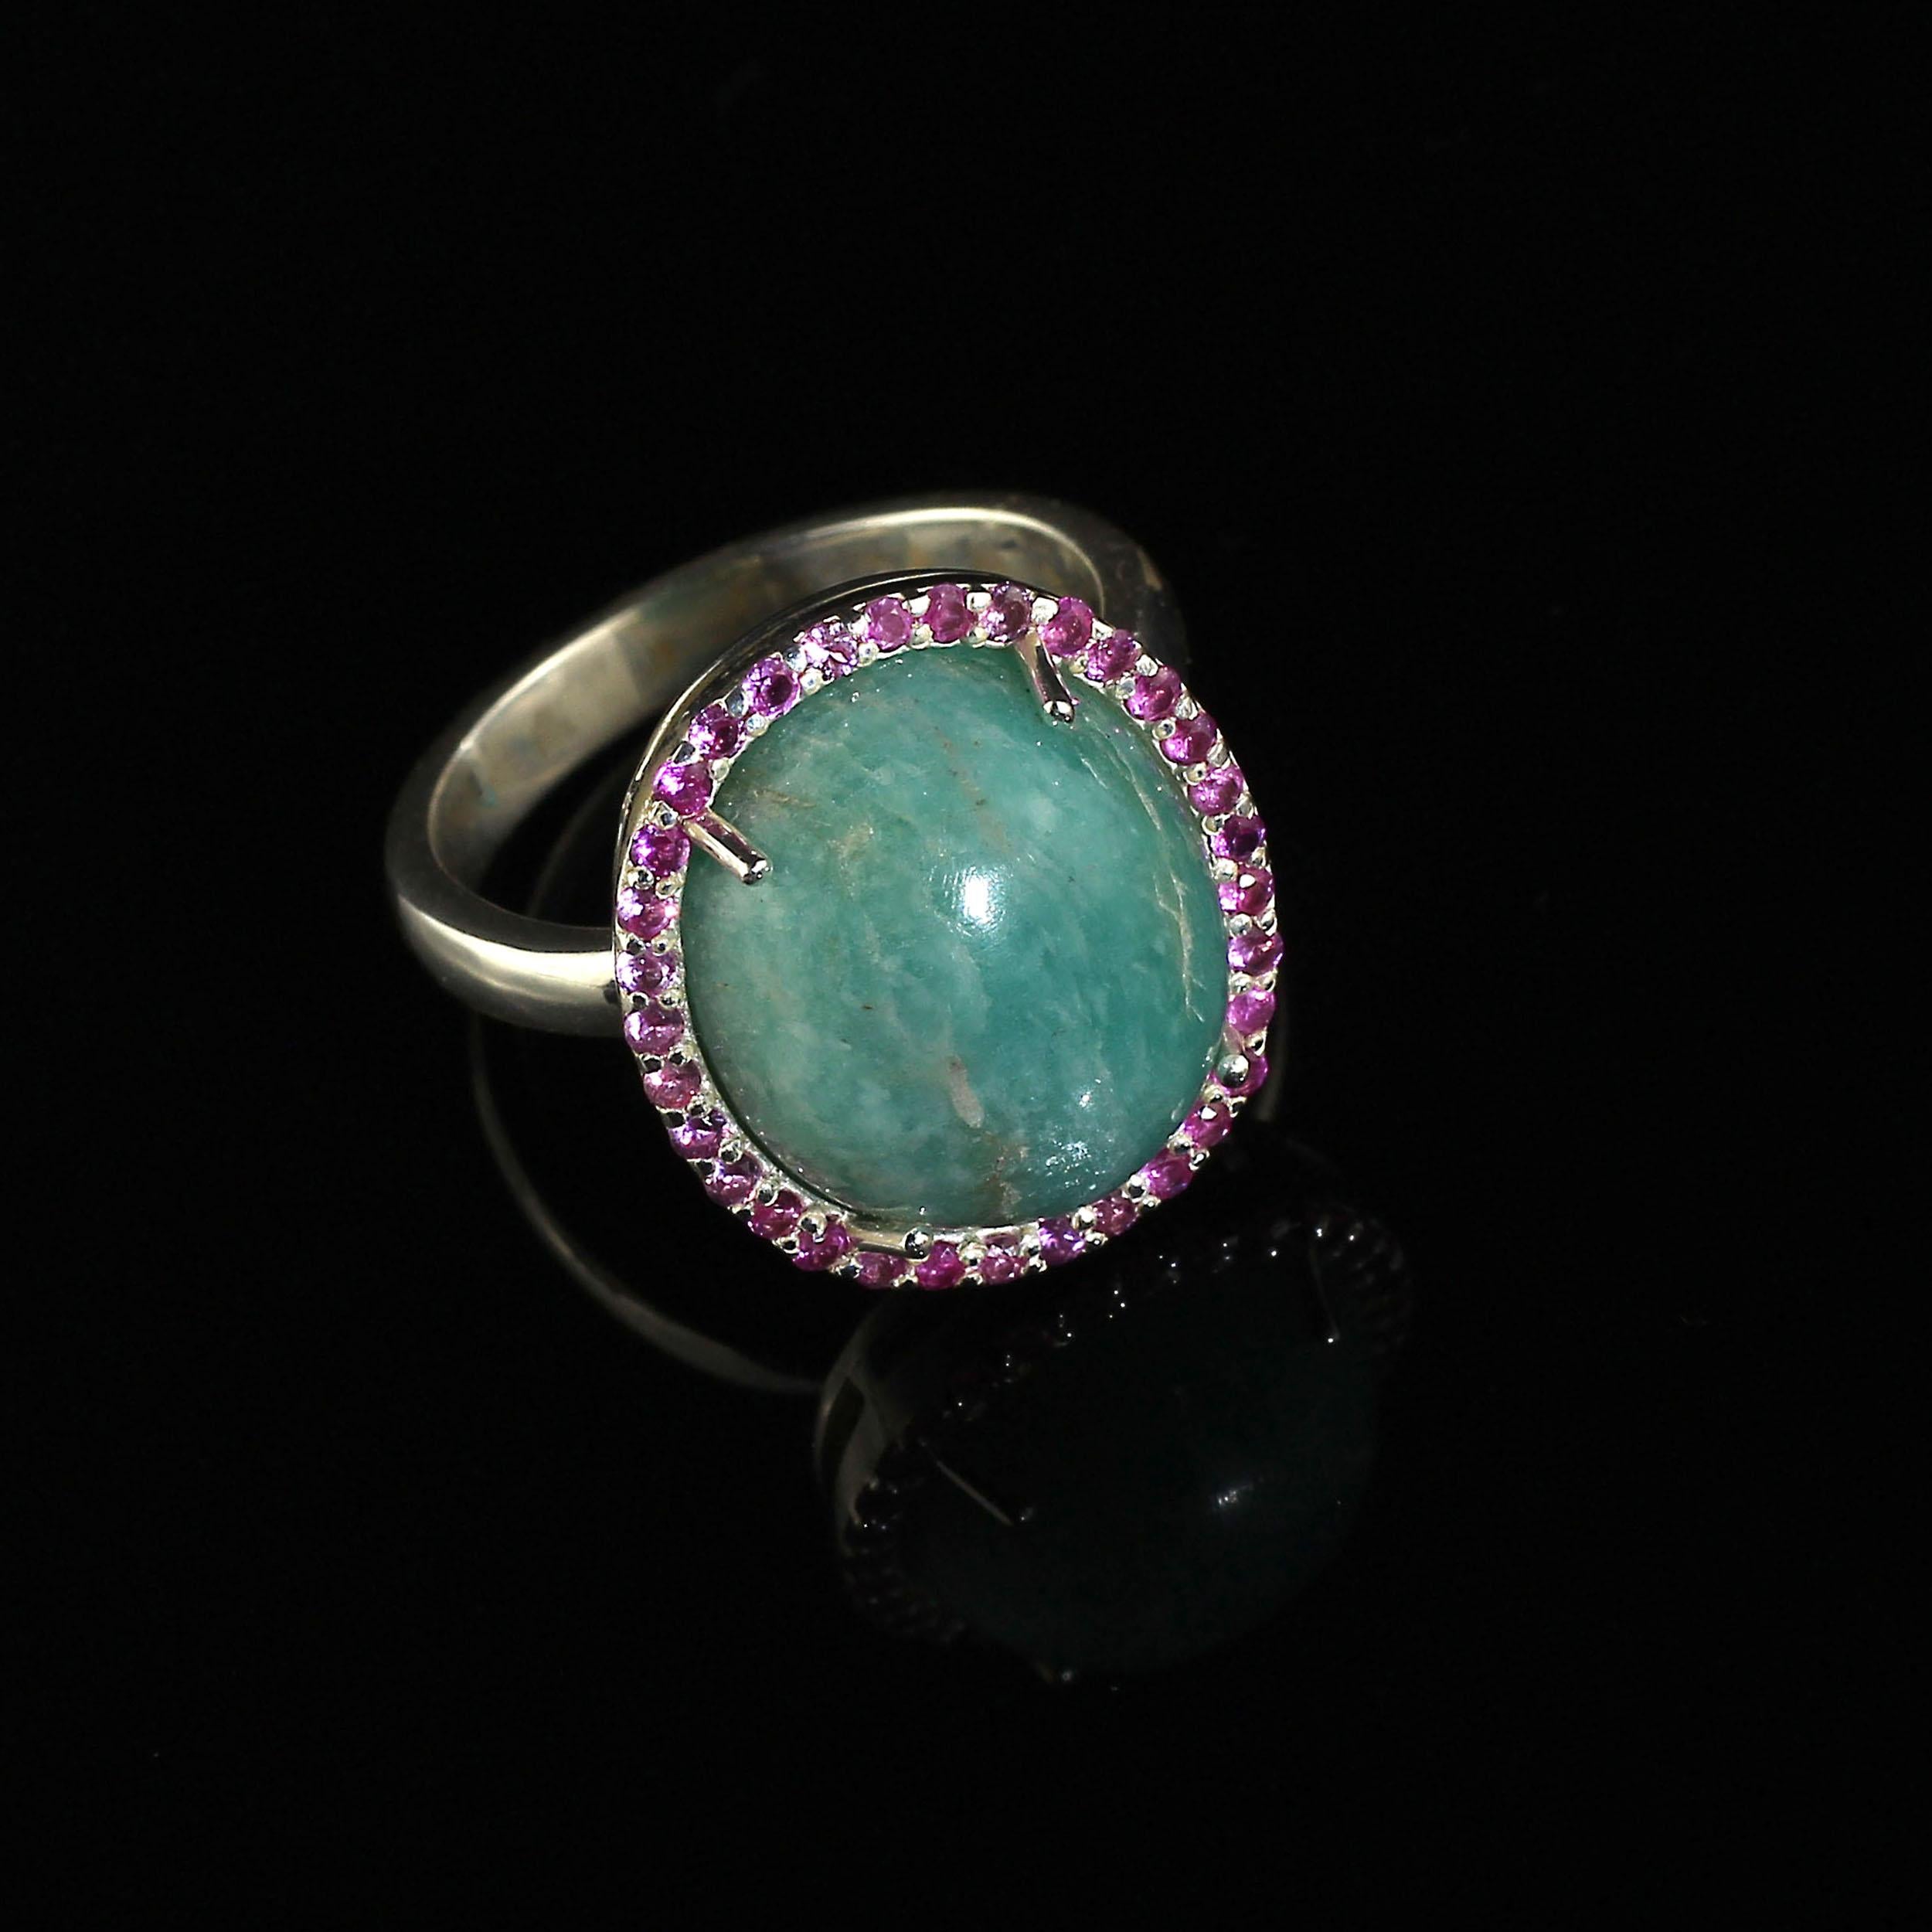 Cabochon AJD Ring of Glowing Green Amazonite Surrounded by Pink Sapphires